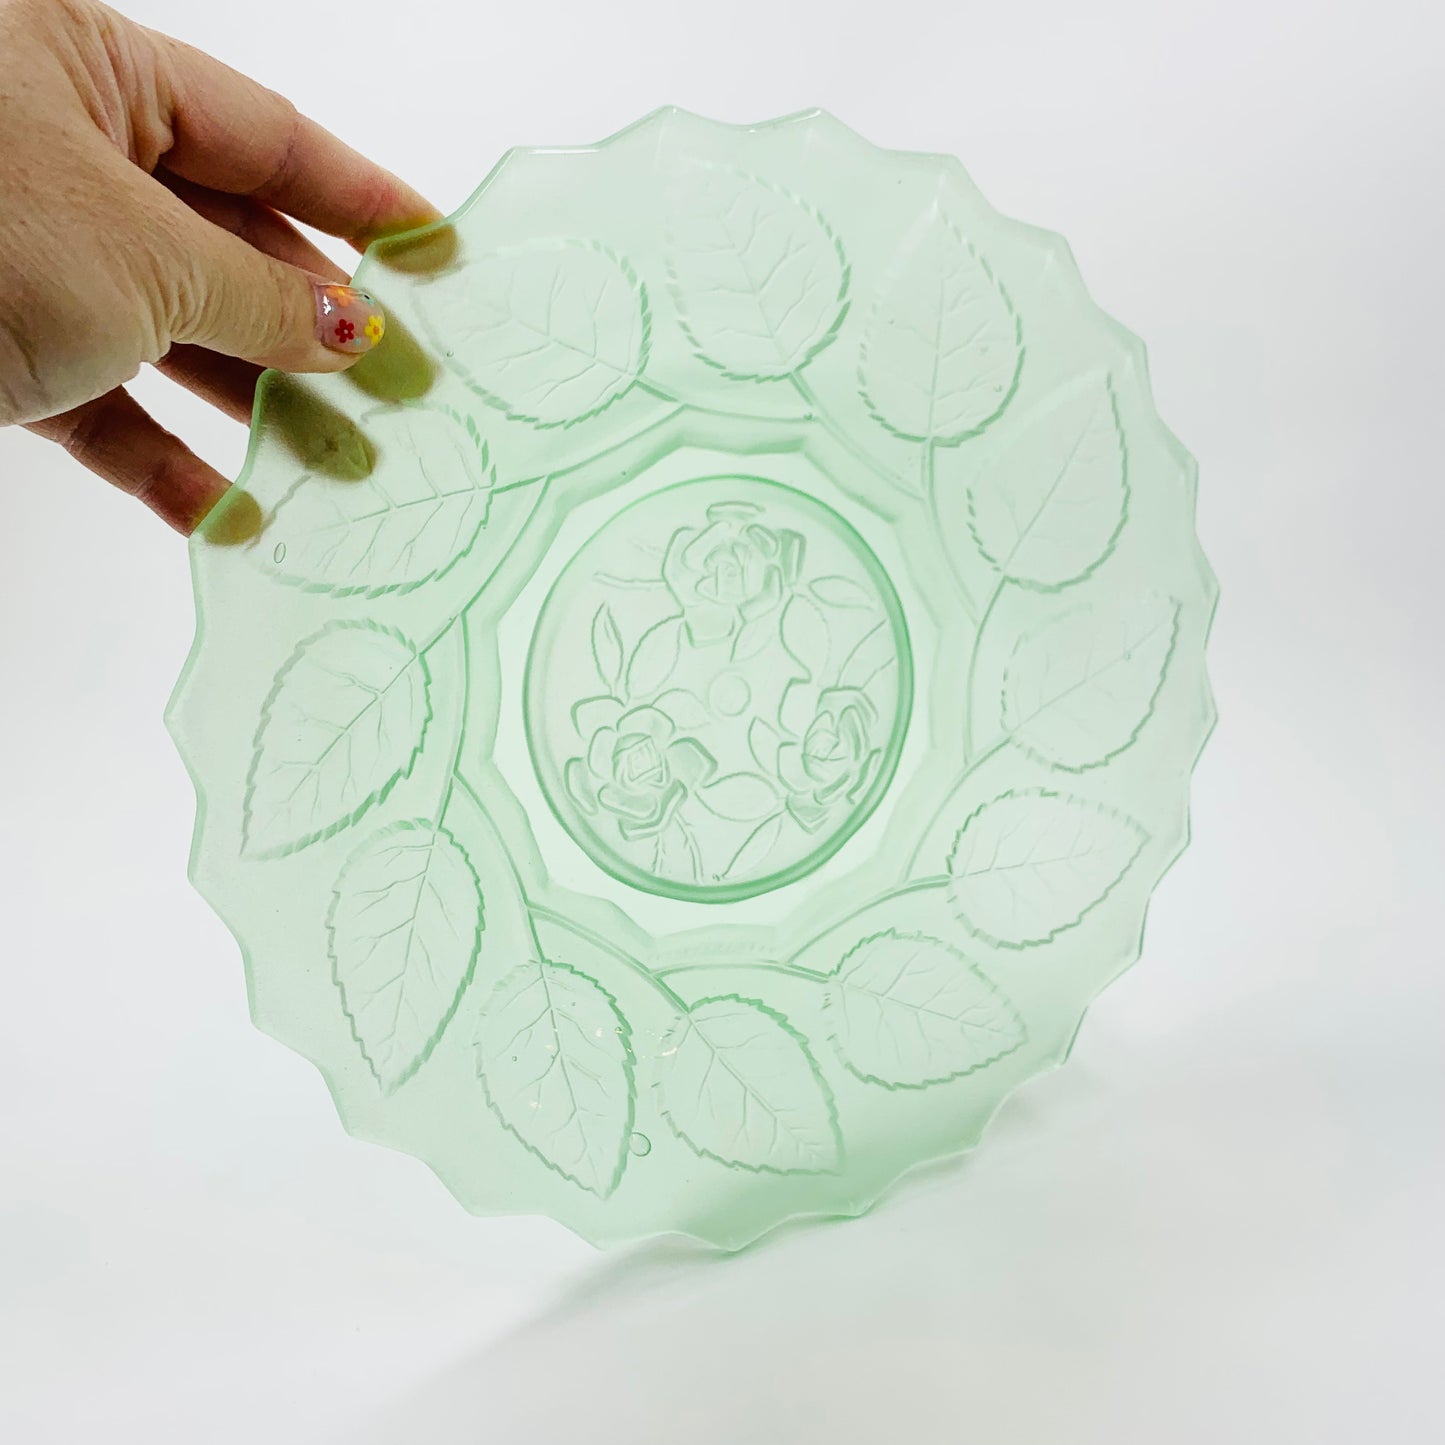 Antique uranium glass plate with leaves motif